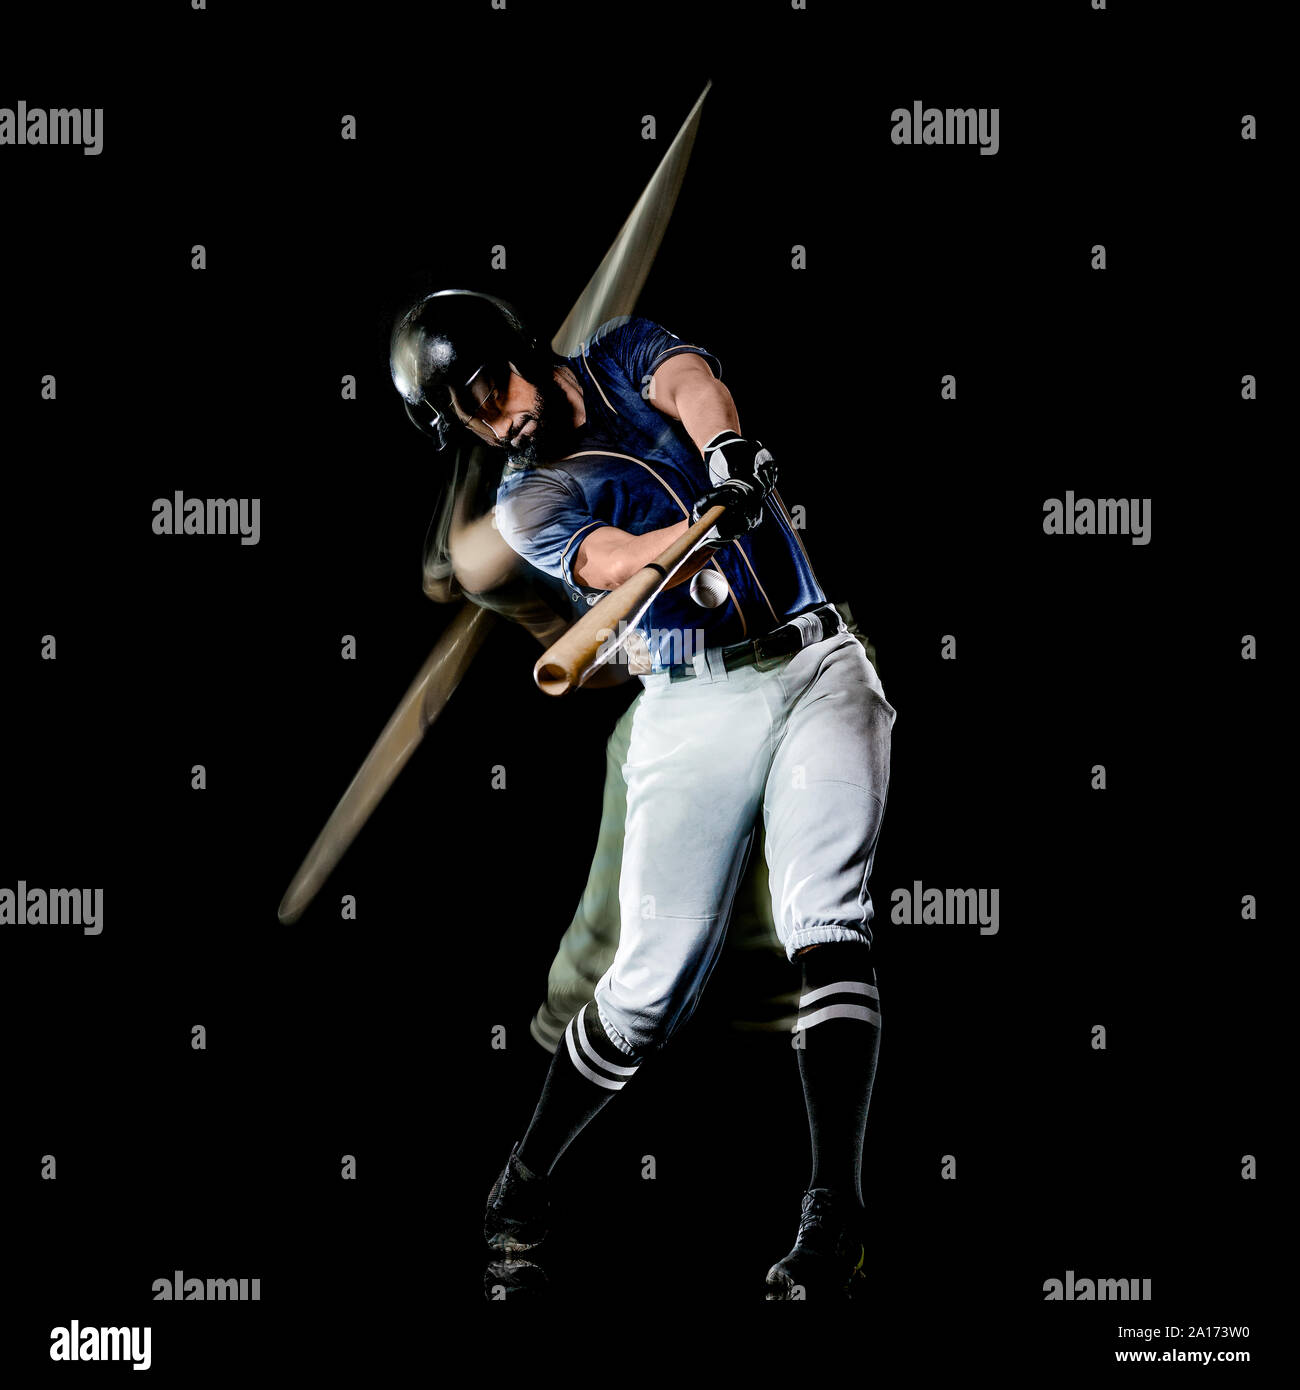 one caucasian baseball player man  studio shot isolated on black background with light painting speed effect Stock Photo